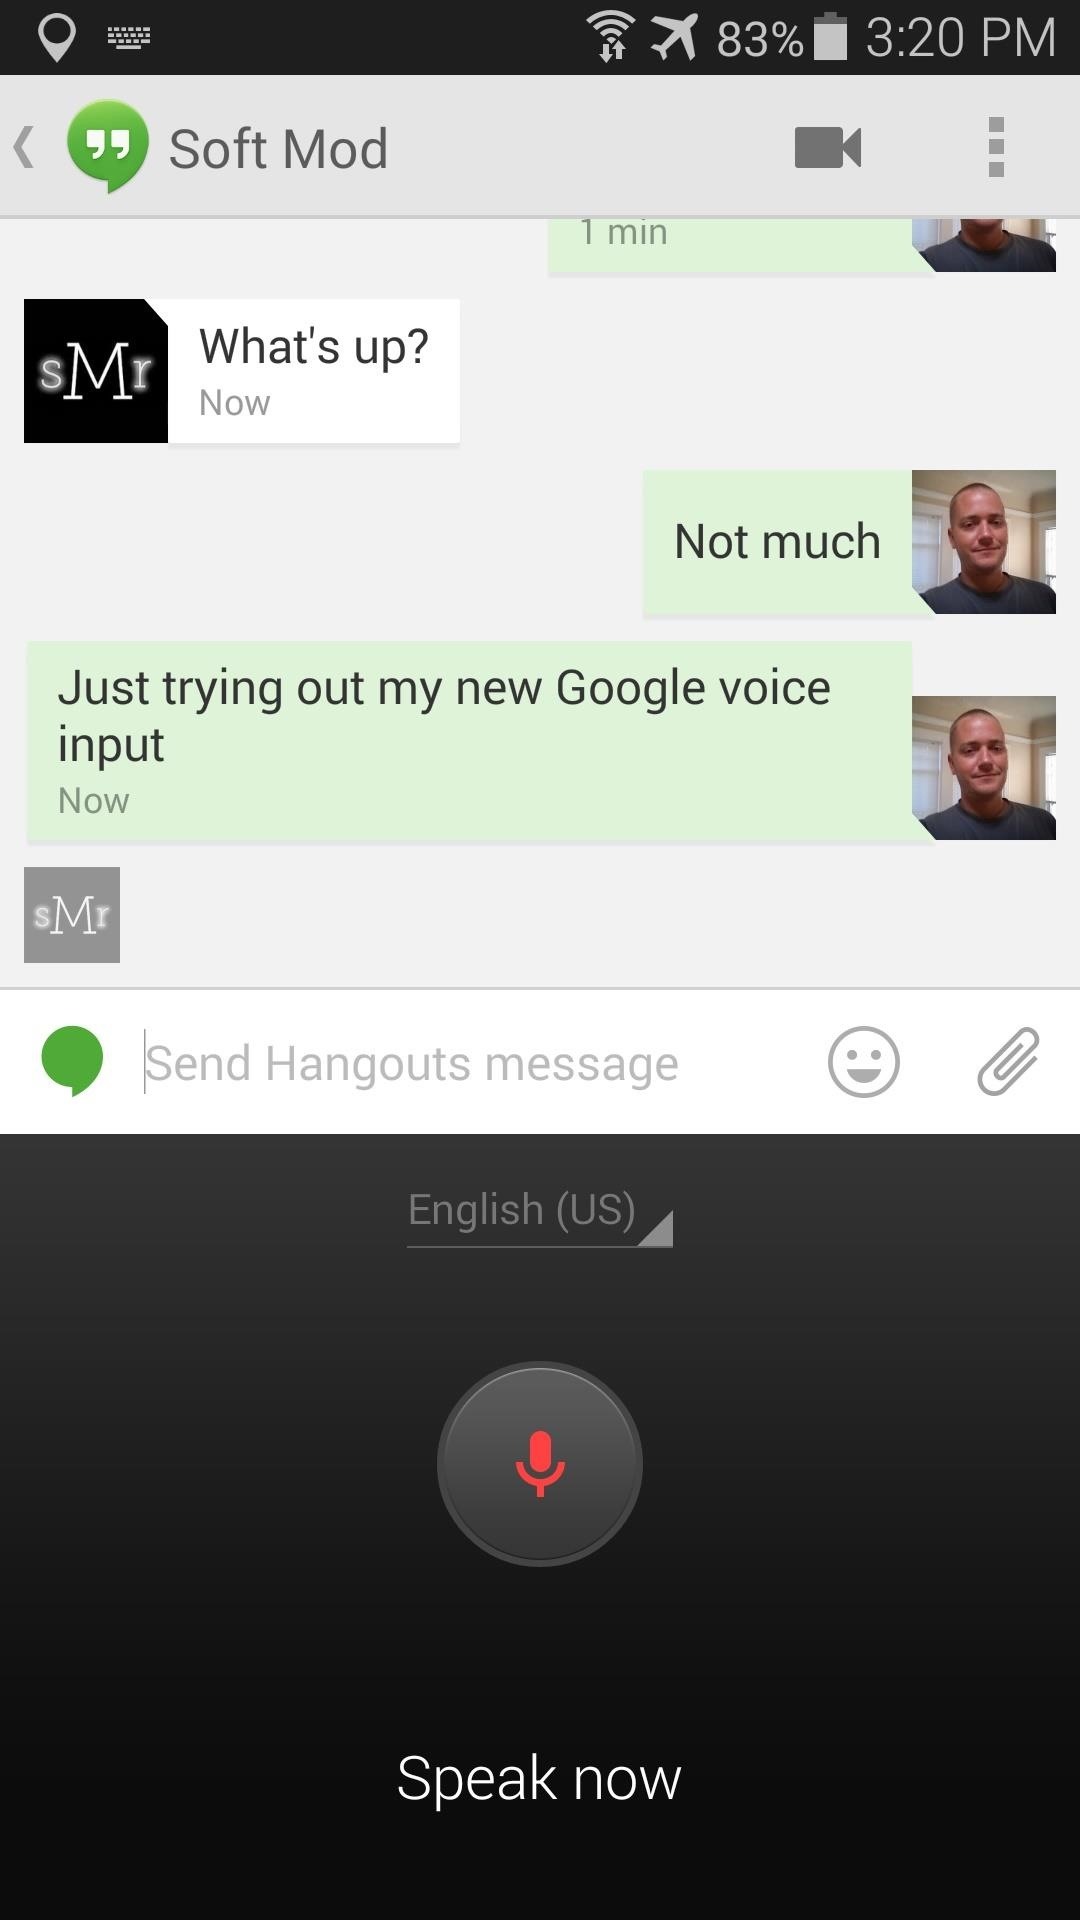 How to Add Custom Colors & Google Voice Typing to Swype on Your Galaxy S5